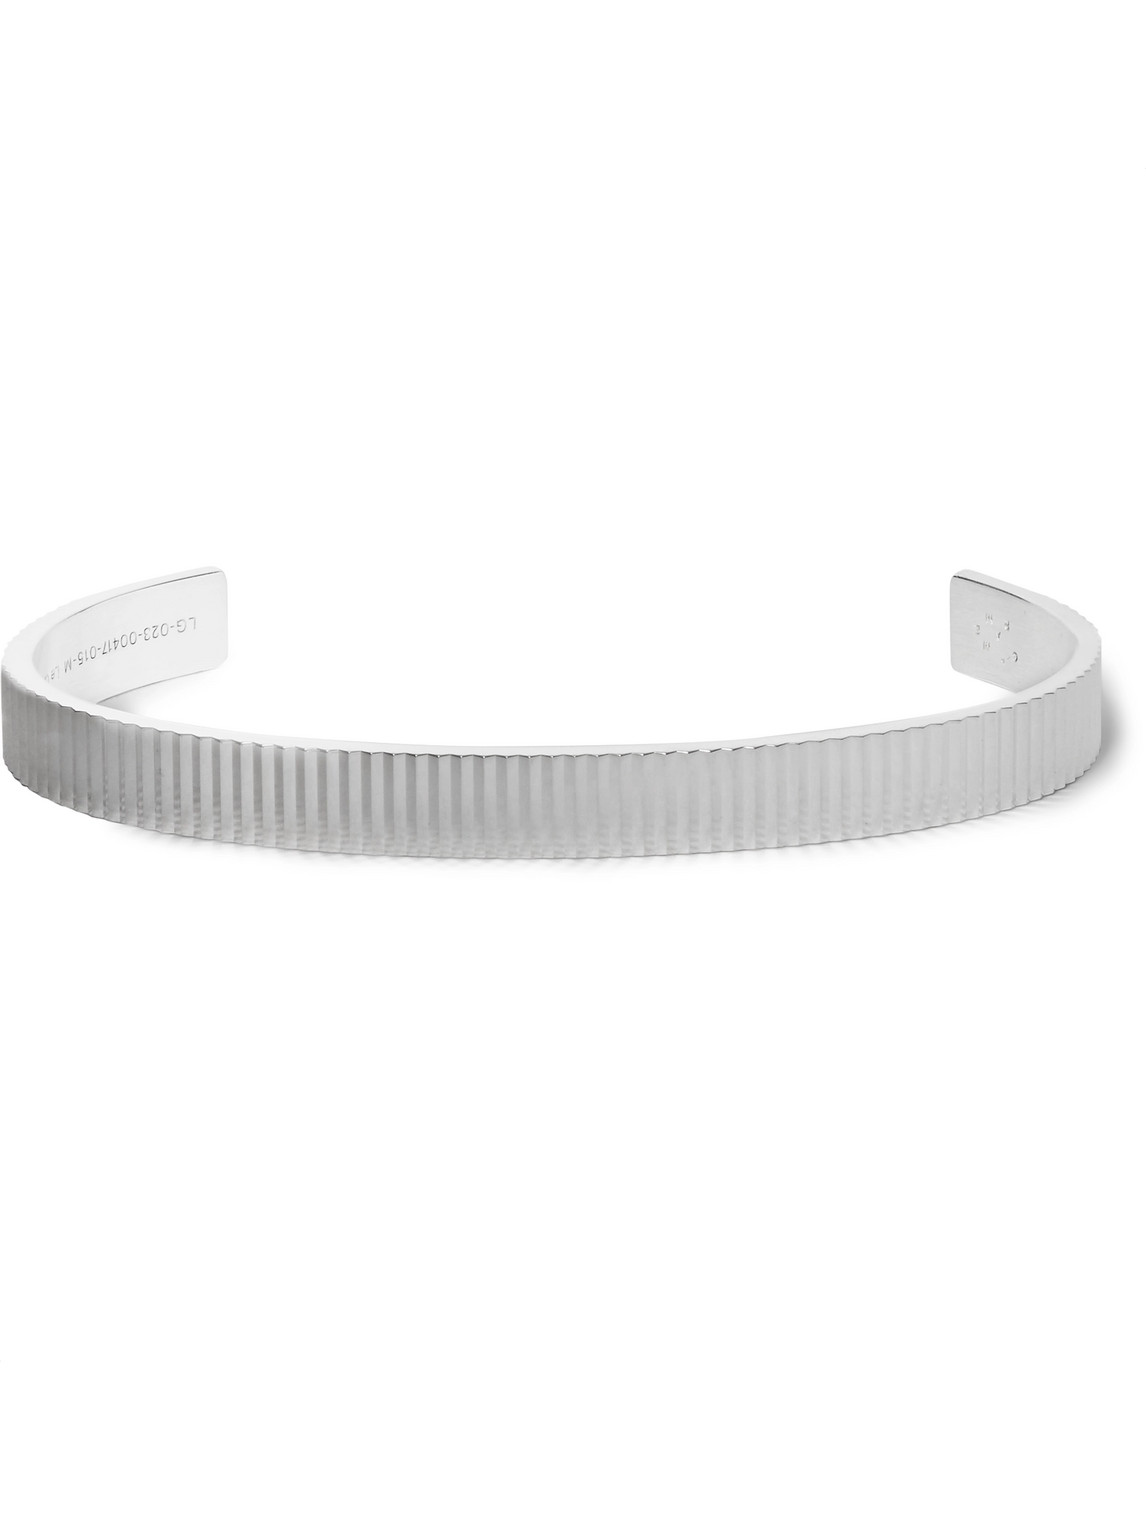 Le Gramme Le 23 Guilloché Polished Sterling Silver Cuff